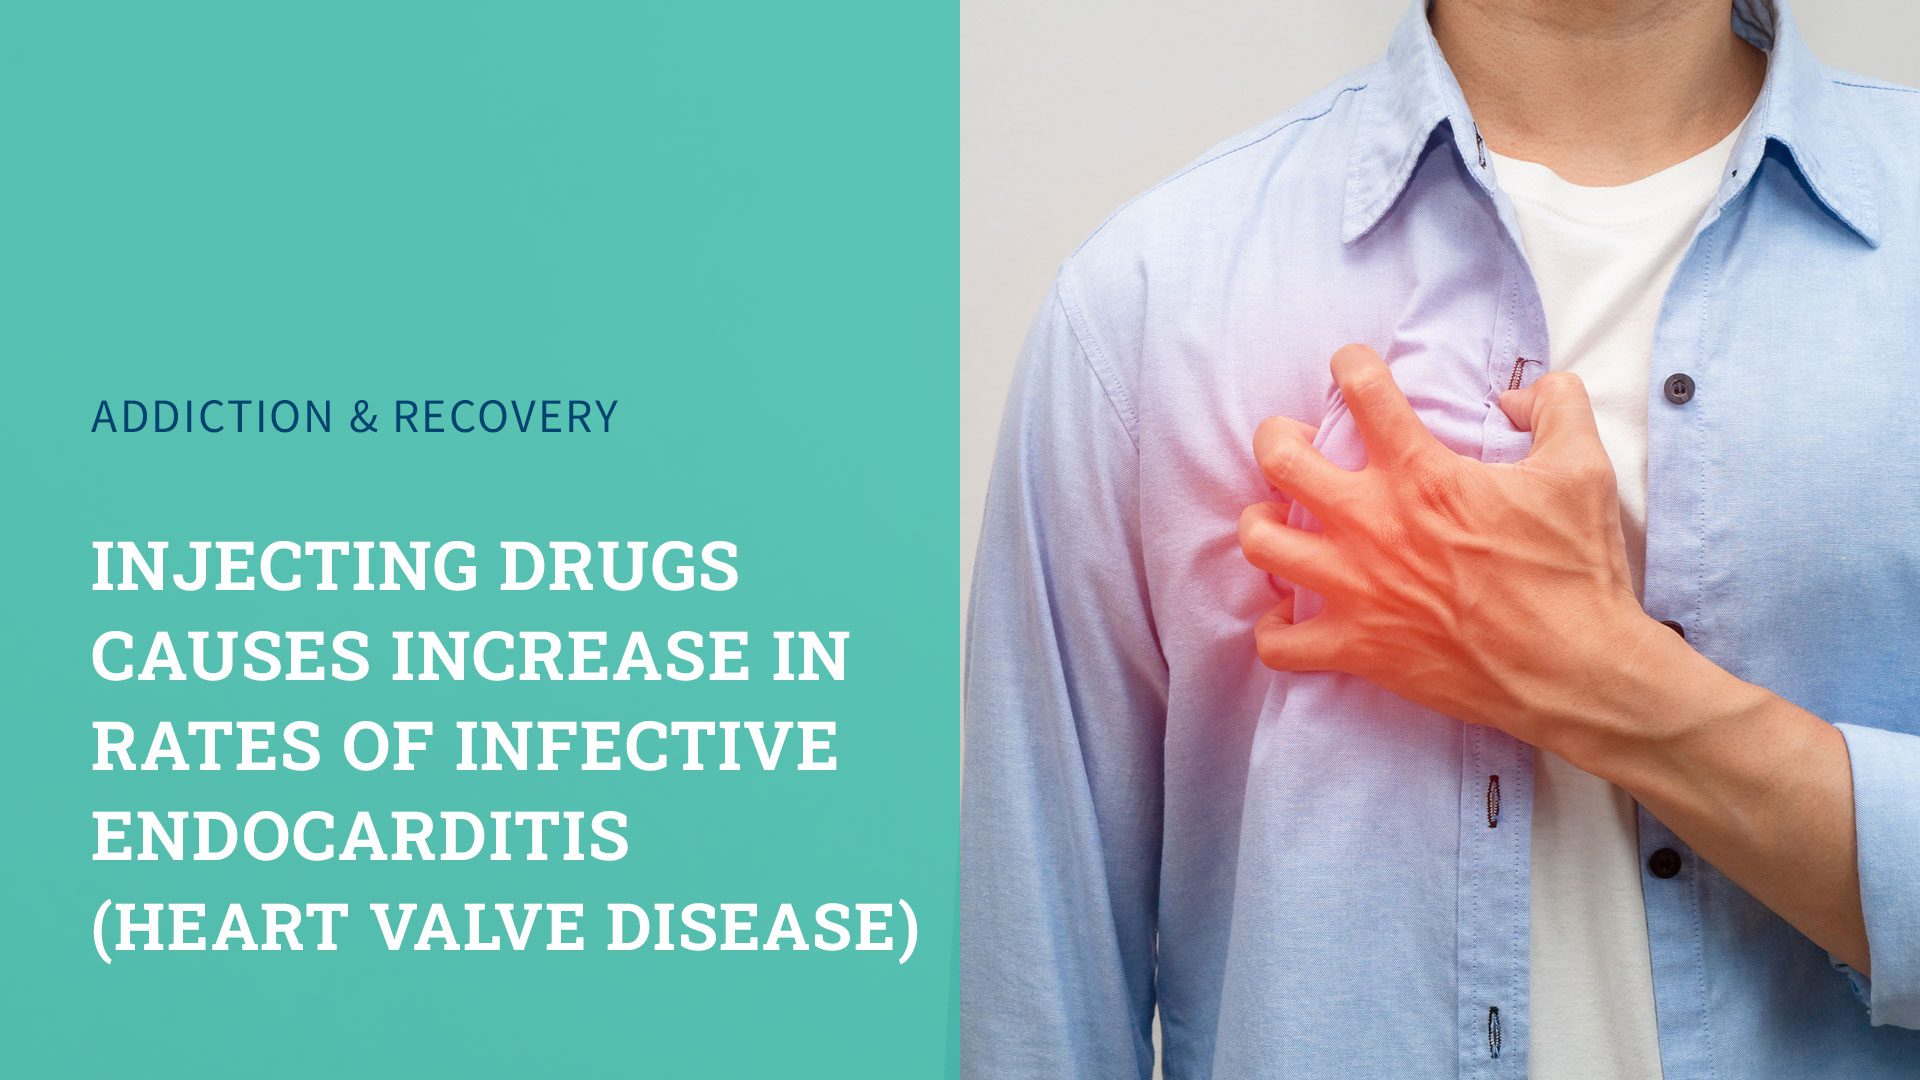 Opioid Crisis Report: Injecting Drugs Causes Increase in Rates of Infective Endocarditis (Heart Valve Disease)